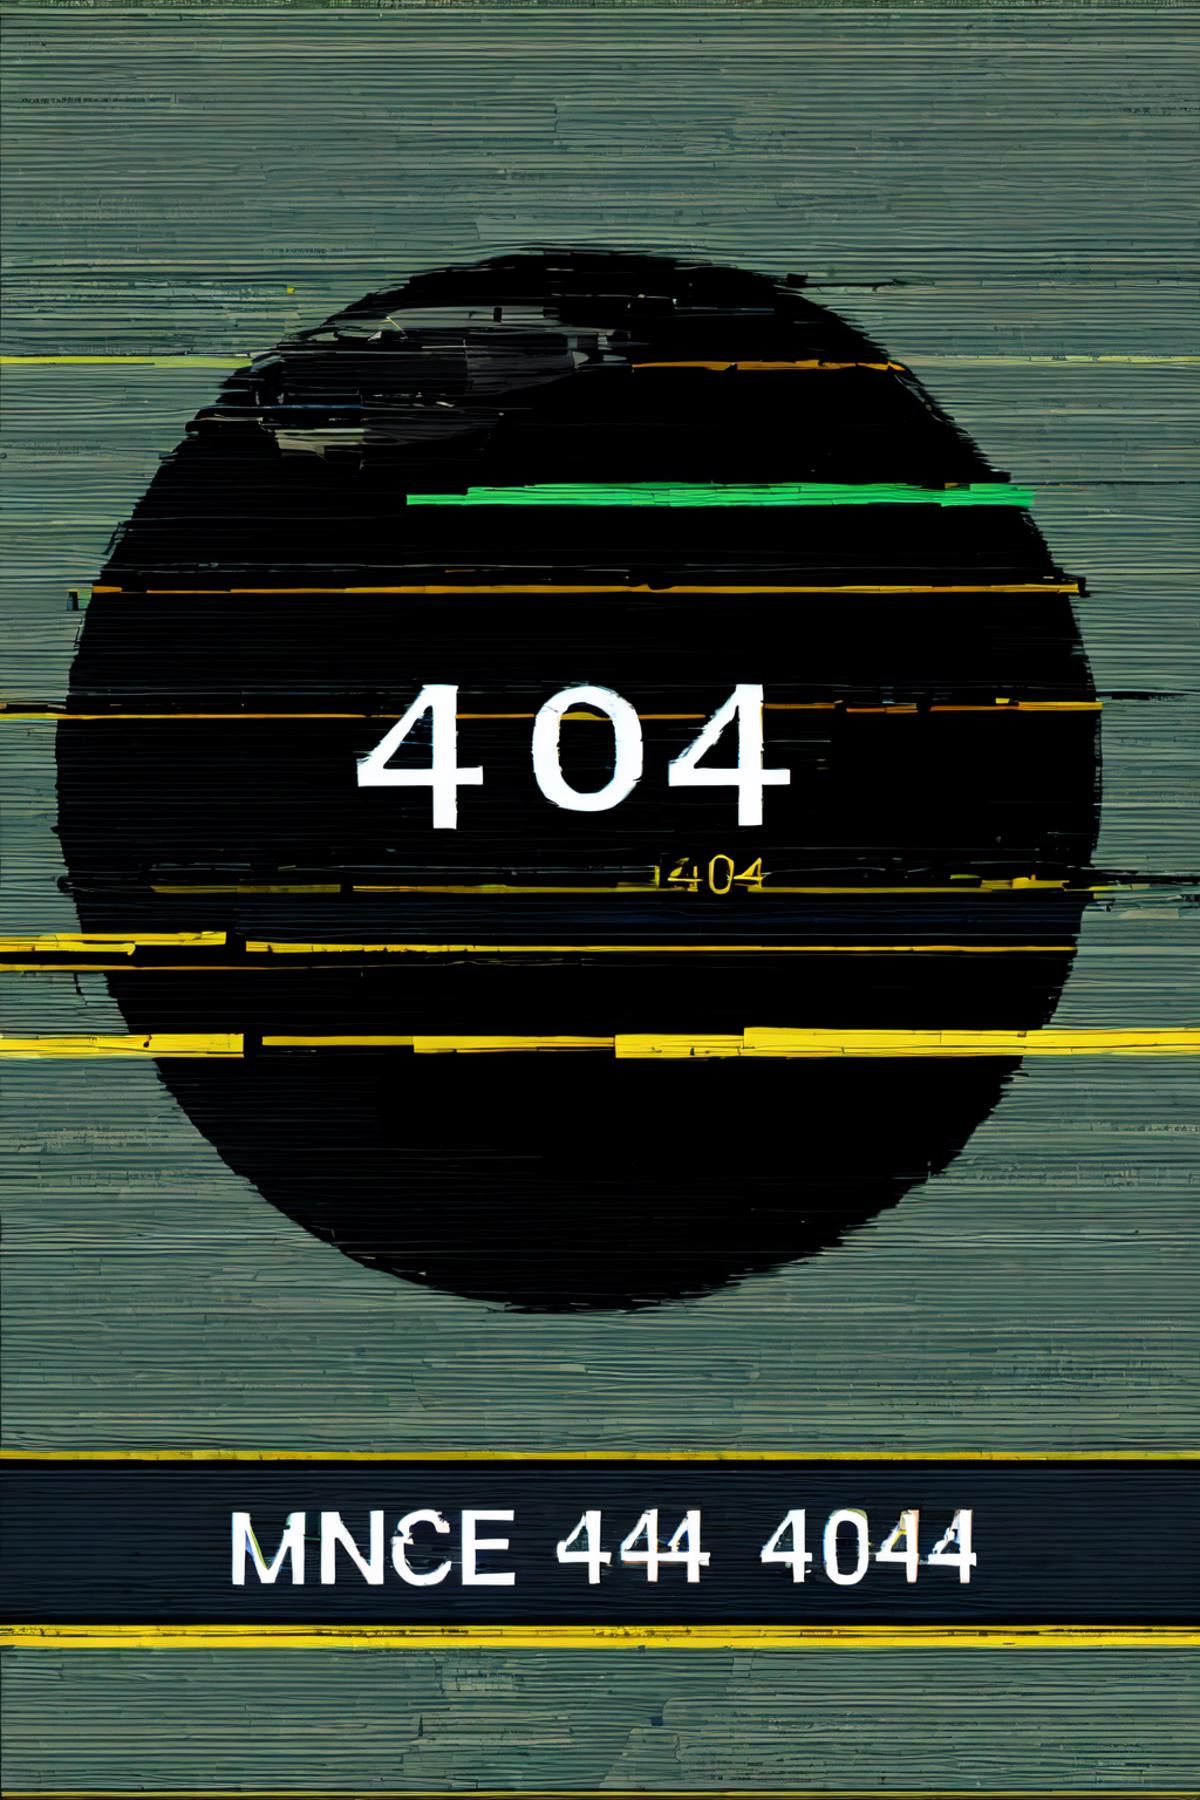 A black and yellow image of a 404 error.